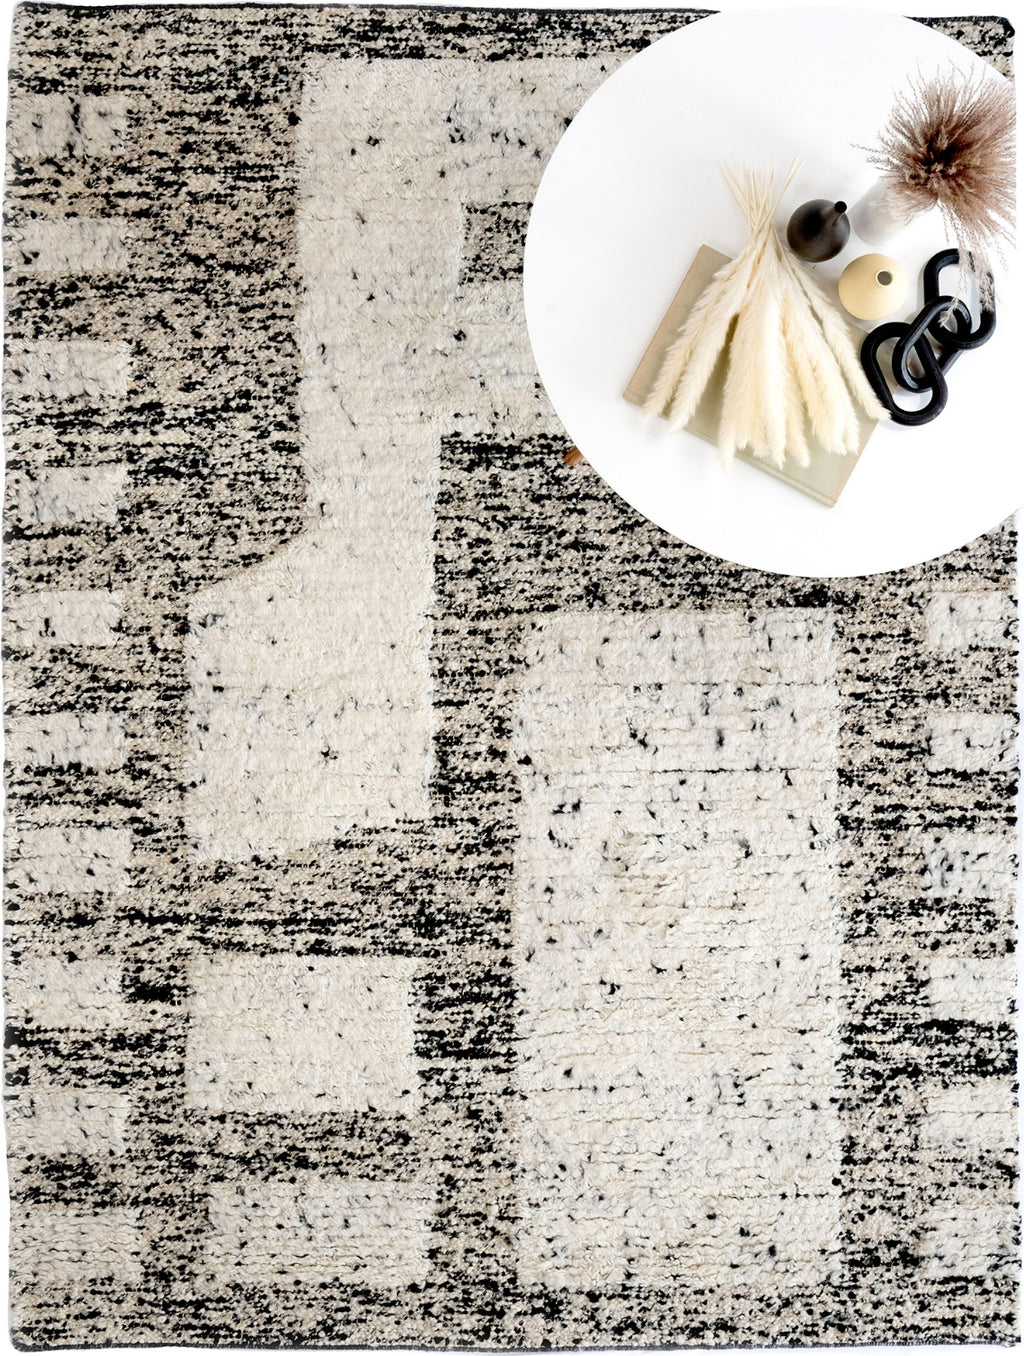 Capel Ariette 3480 Onyx Snow Area Rug Rectangle Roomshot Image 1 Feature